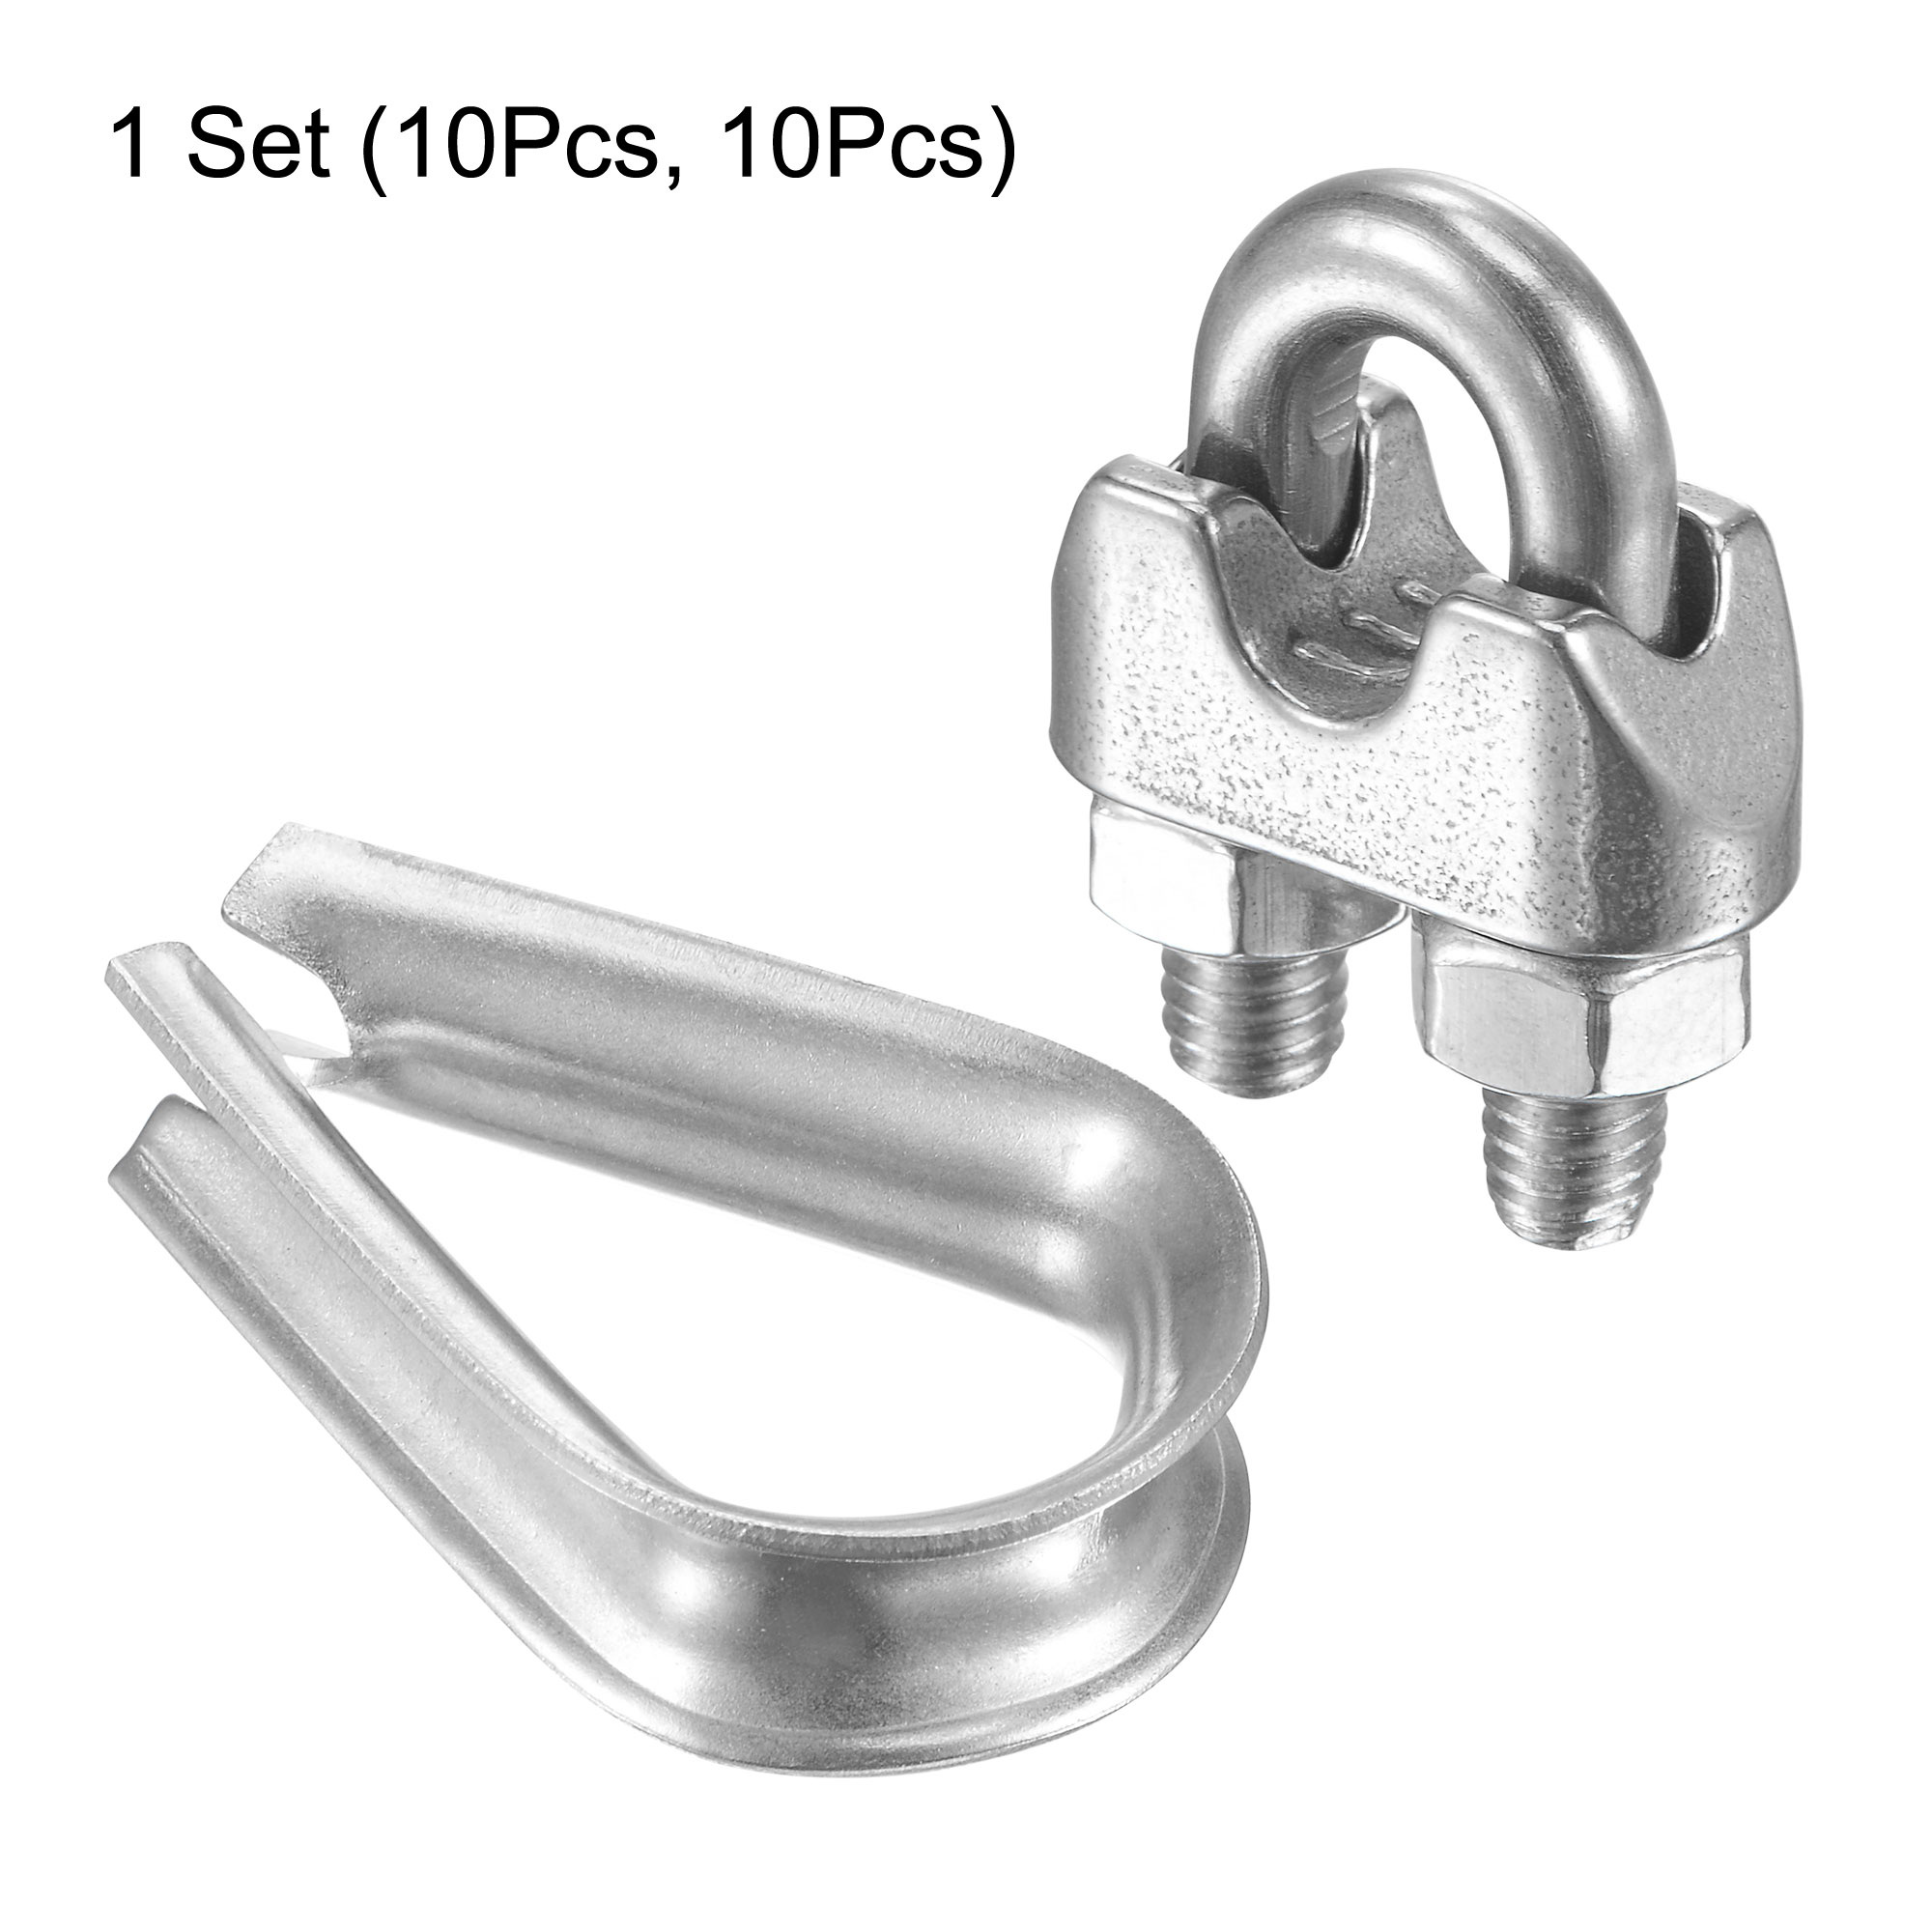 Uxcell M6 Stainless Steel Wire Rope Clip Kit, Included Rope Clamp 10 Pack Thimble Rigging 10 Pack - image 5 of 7